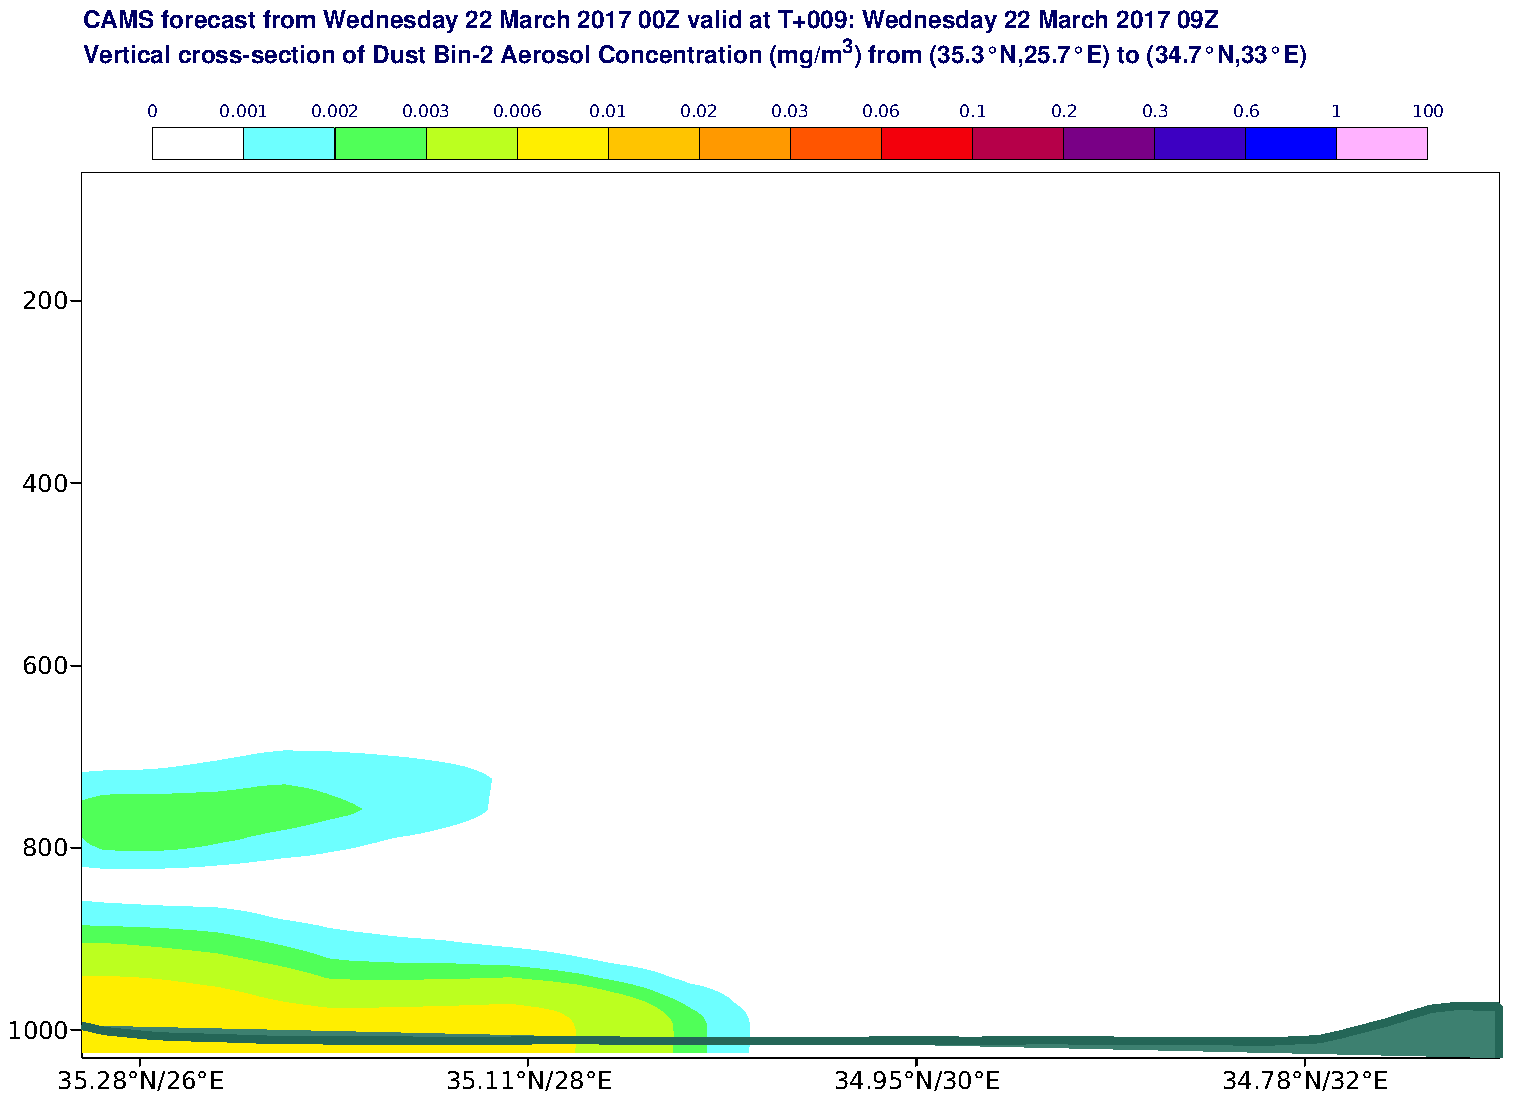 Vertical cross-section of Dust Bin-2 Aerosol Concentration (mg/m3) valid at T9 - 2017-03-22 09:00